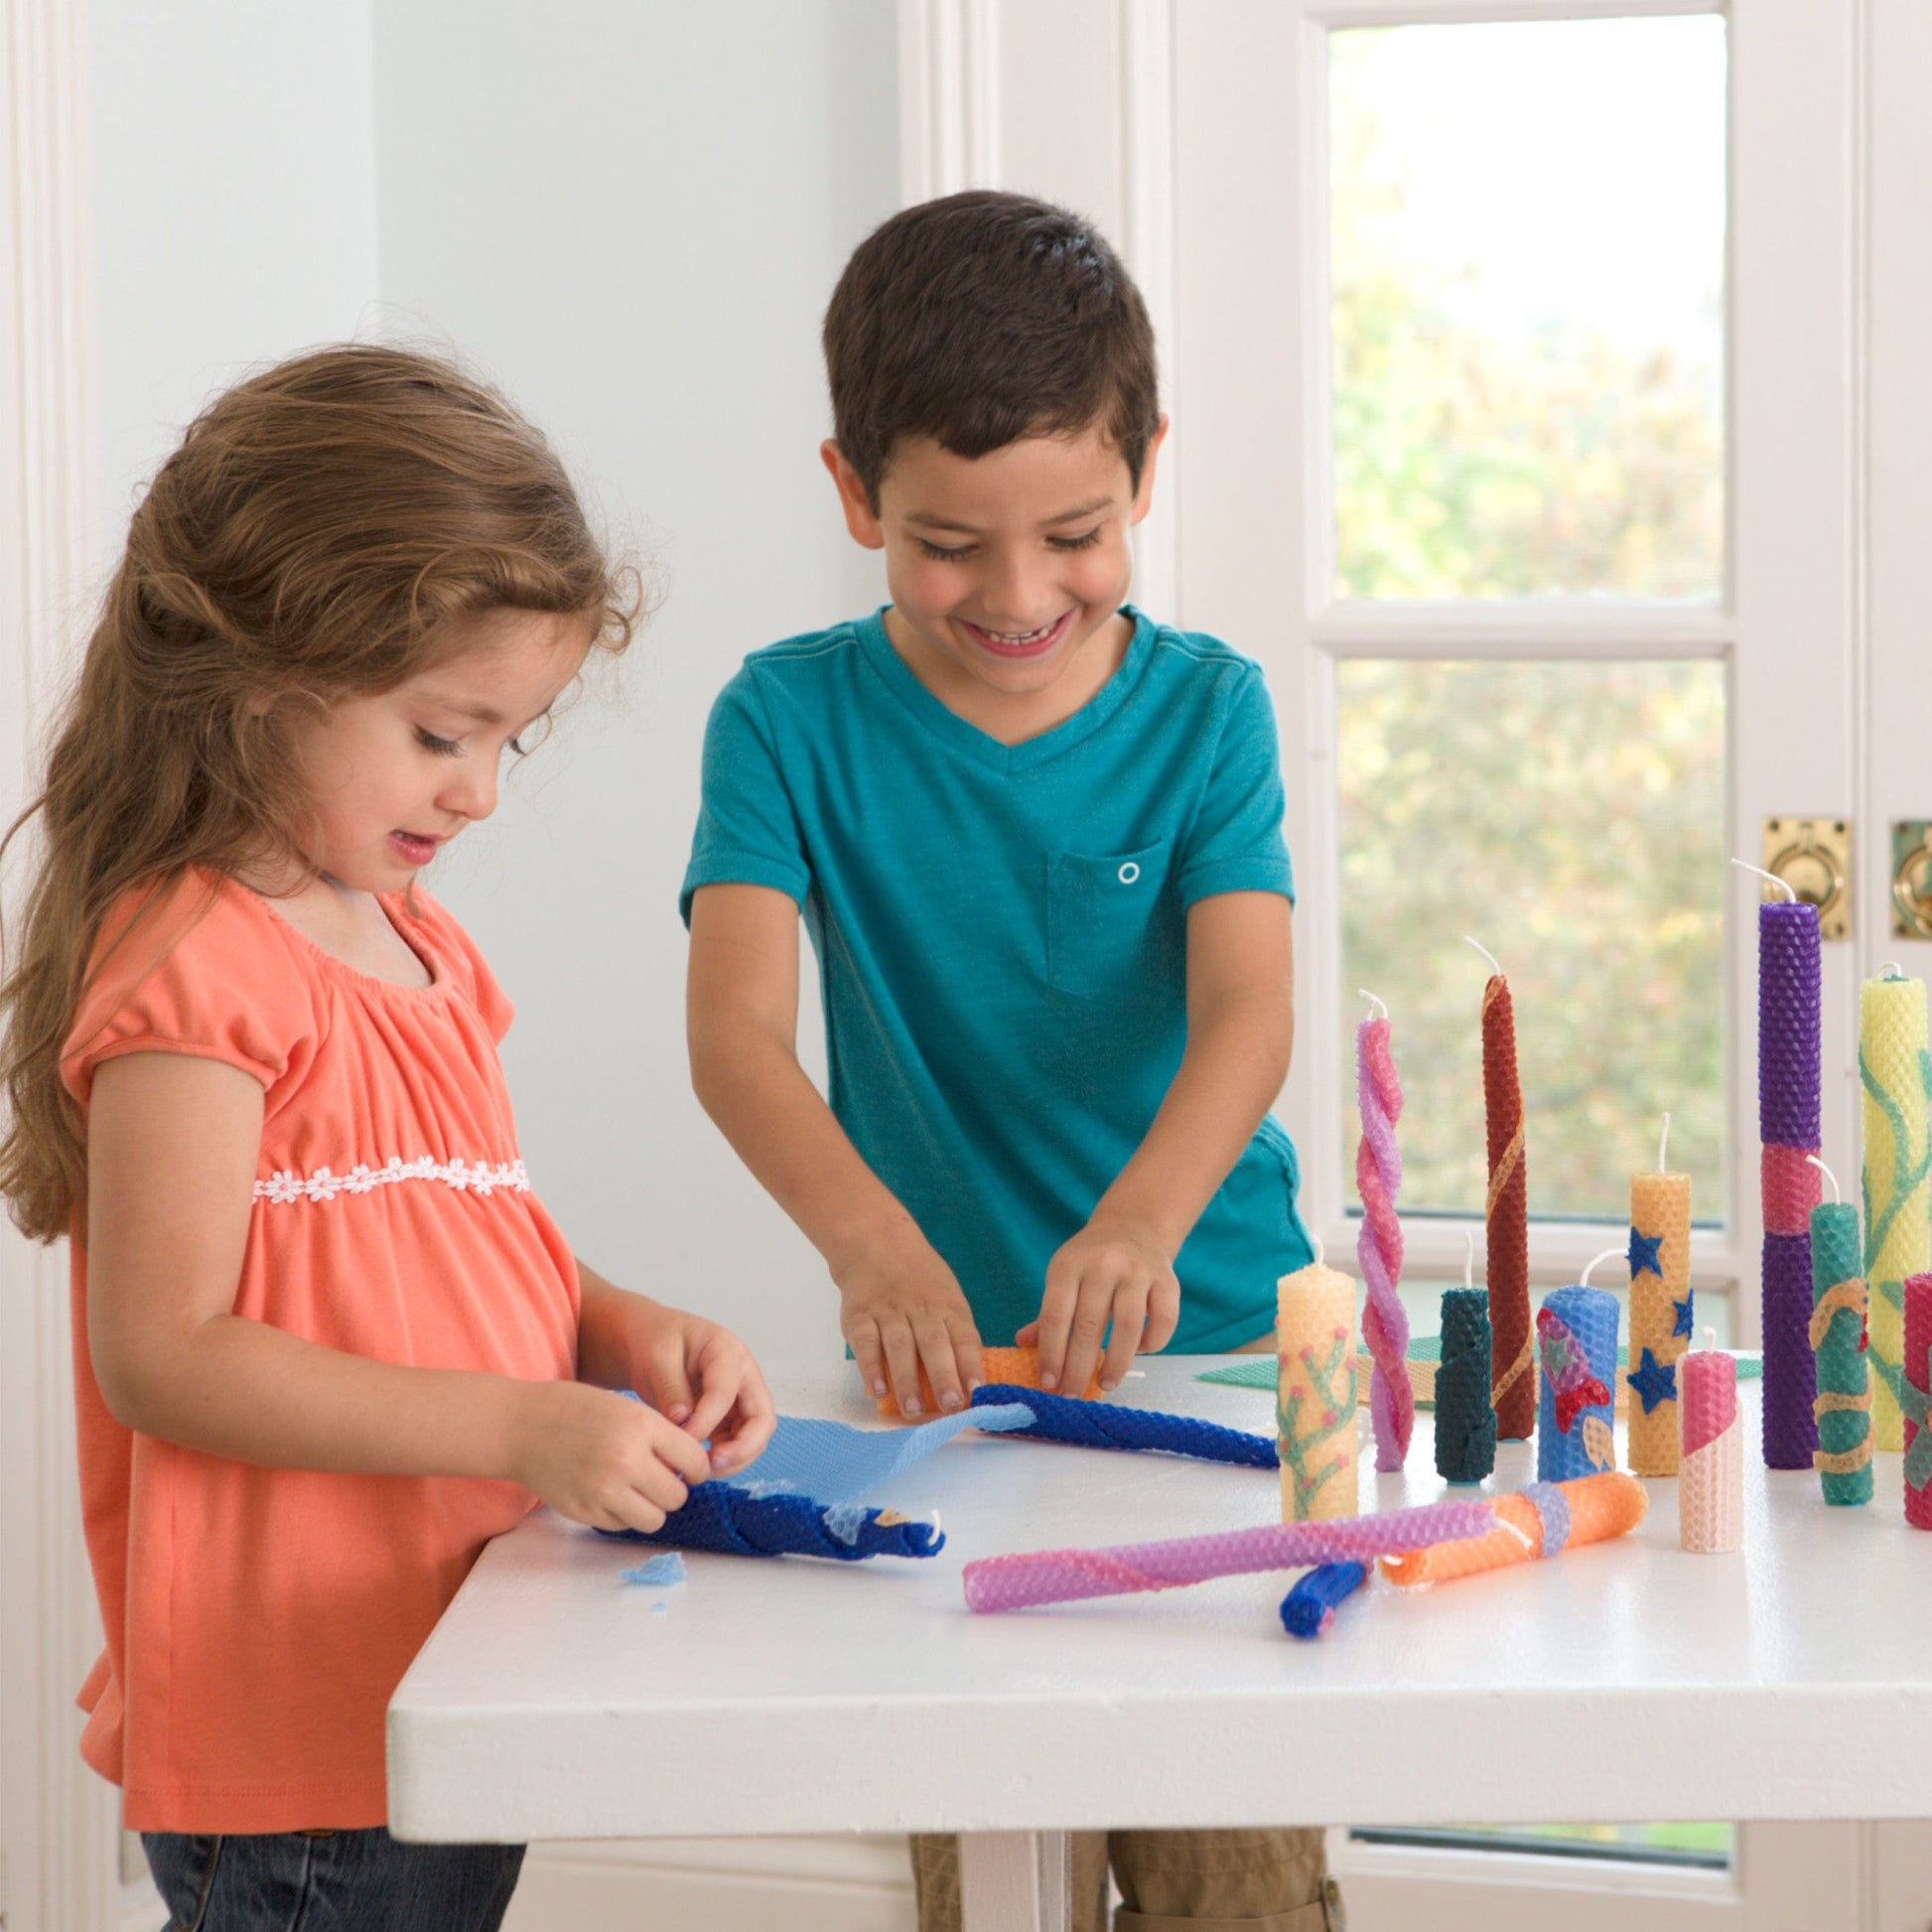 Kids Candle Making Kit, Pure Beeswax Candles